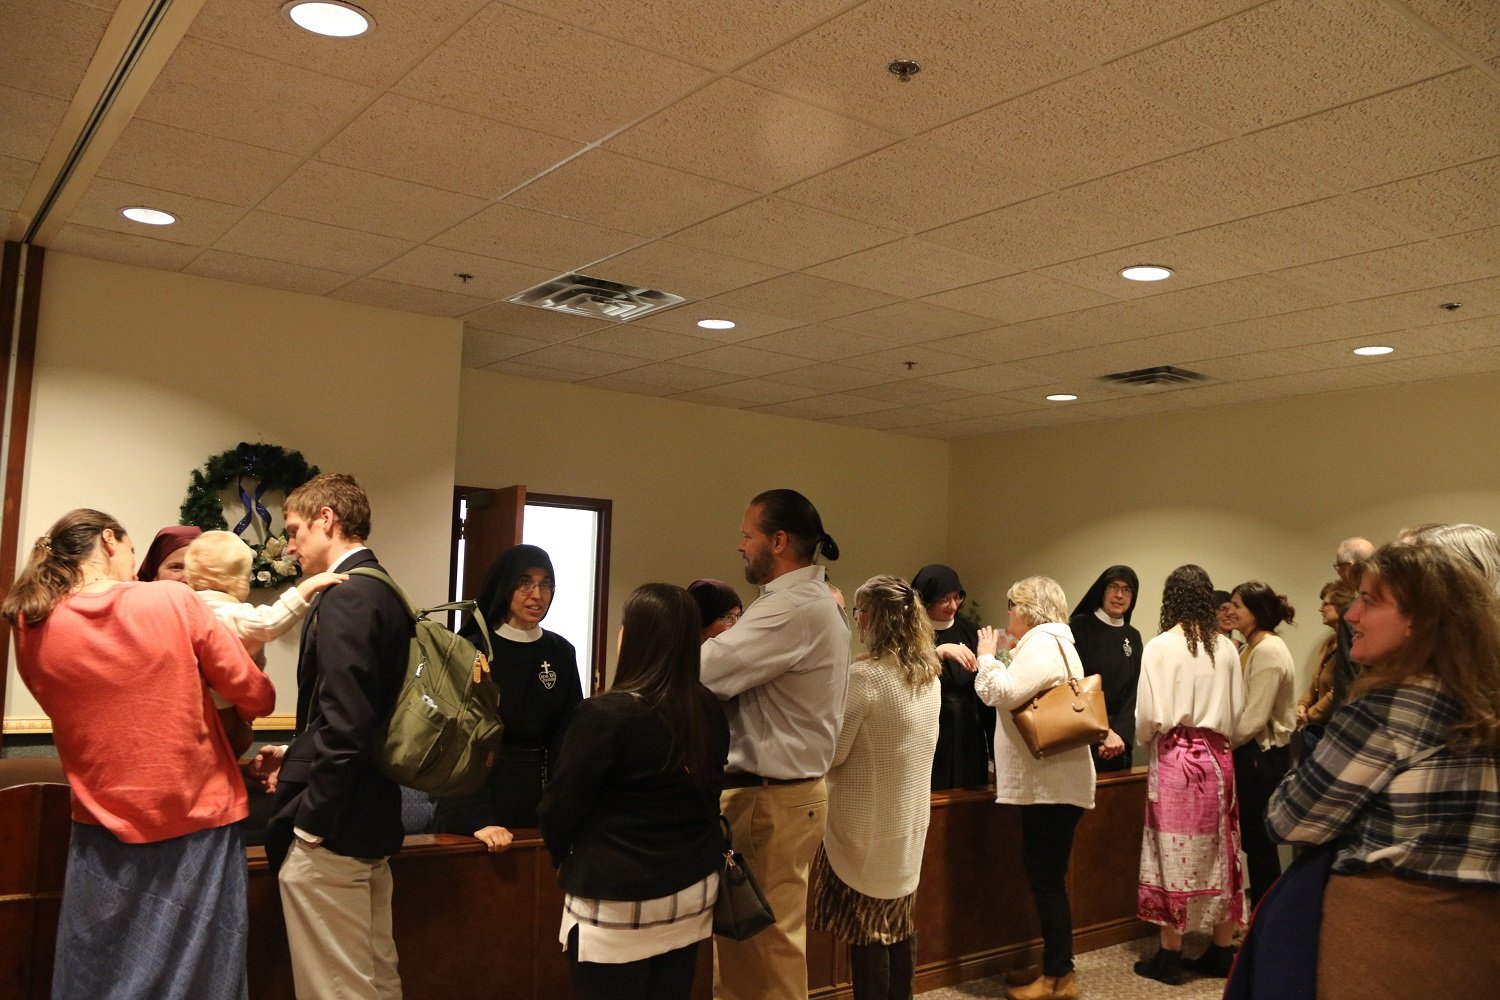  The receiving line after Mass seemed to stretch for miles!   (Photo: Elizabeth Wong Barnstead, Western KY Catholic)  